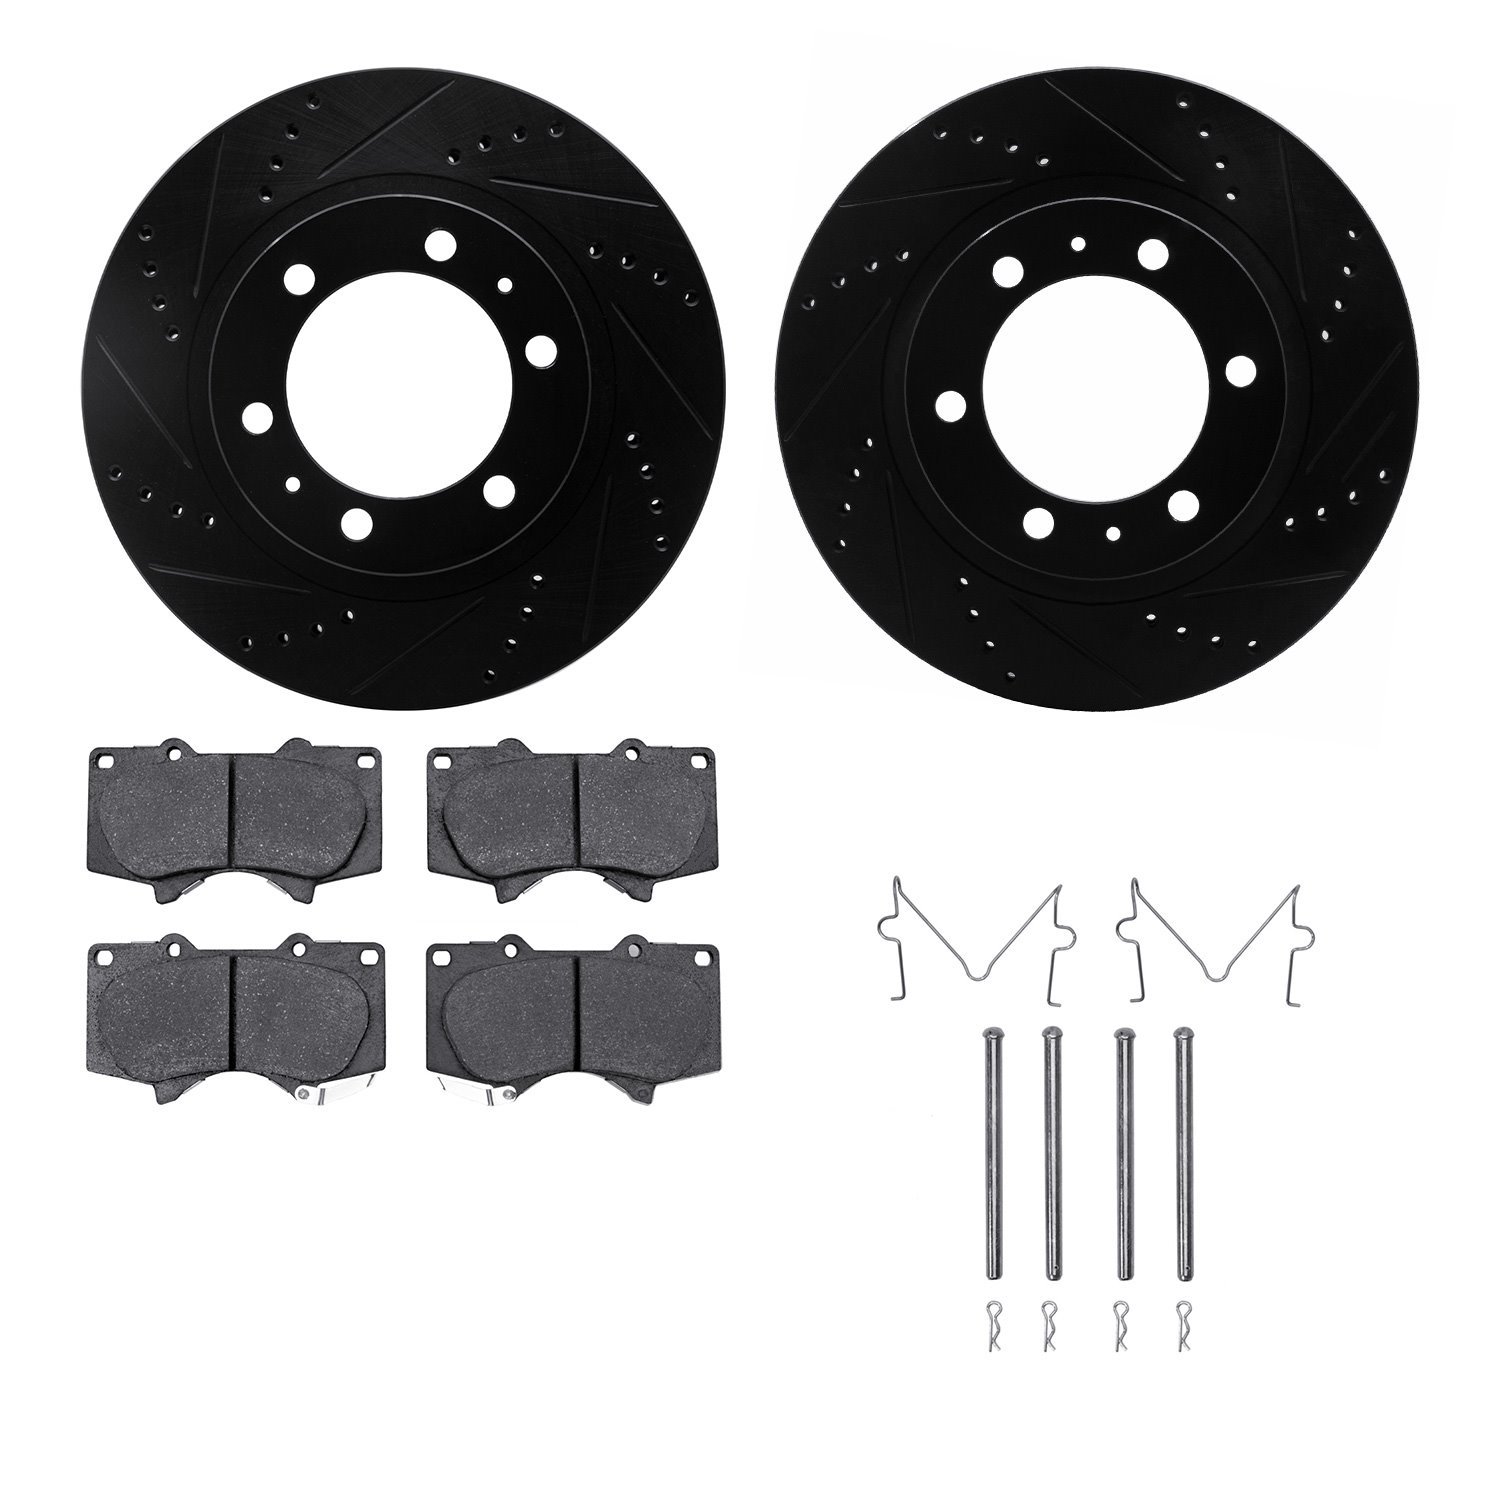 8412-76017 Drilled/Slotted Brake Rotors with Ultimate-Duty Brake Pads Kit & Hardware [Black], Fits Select Lexus/Toyota/Scion, Po